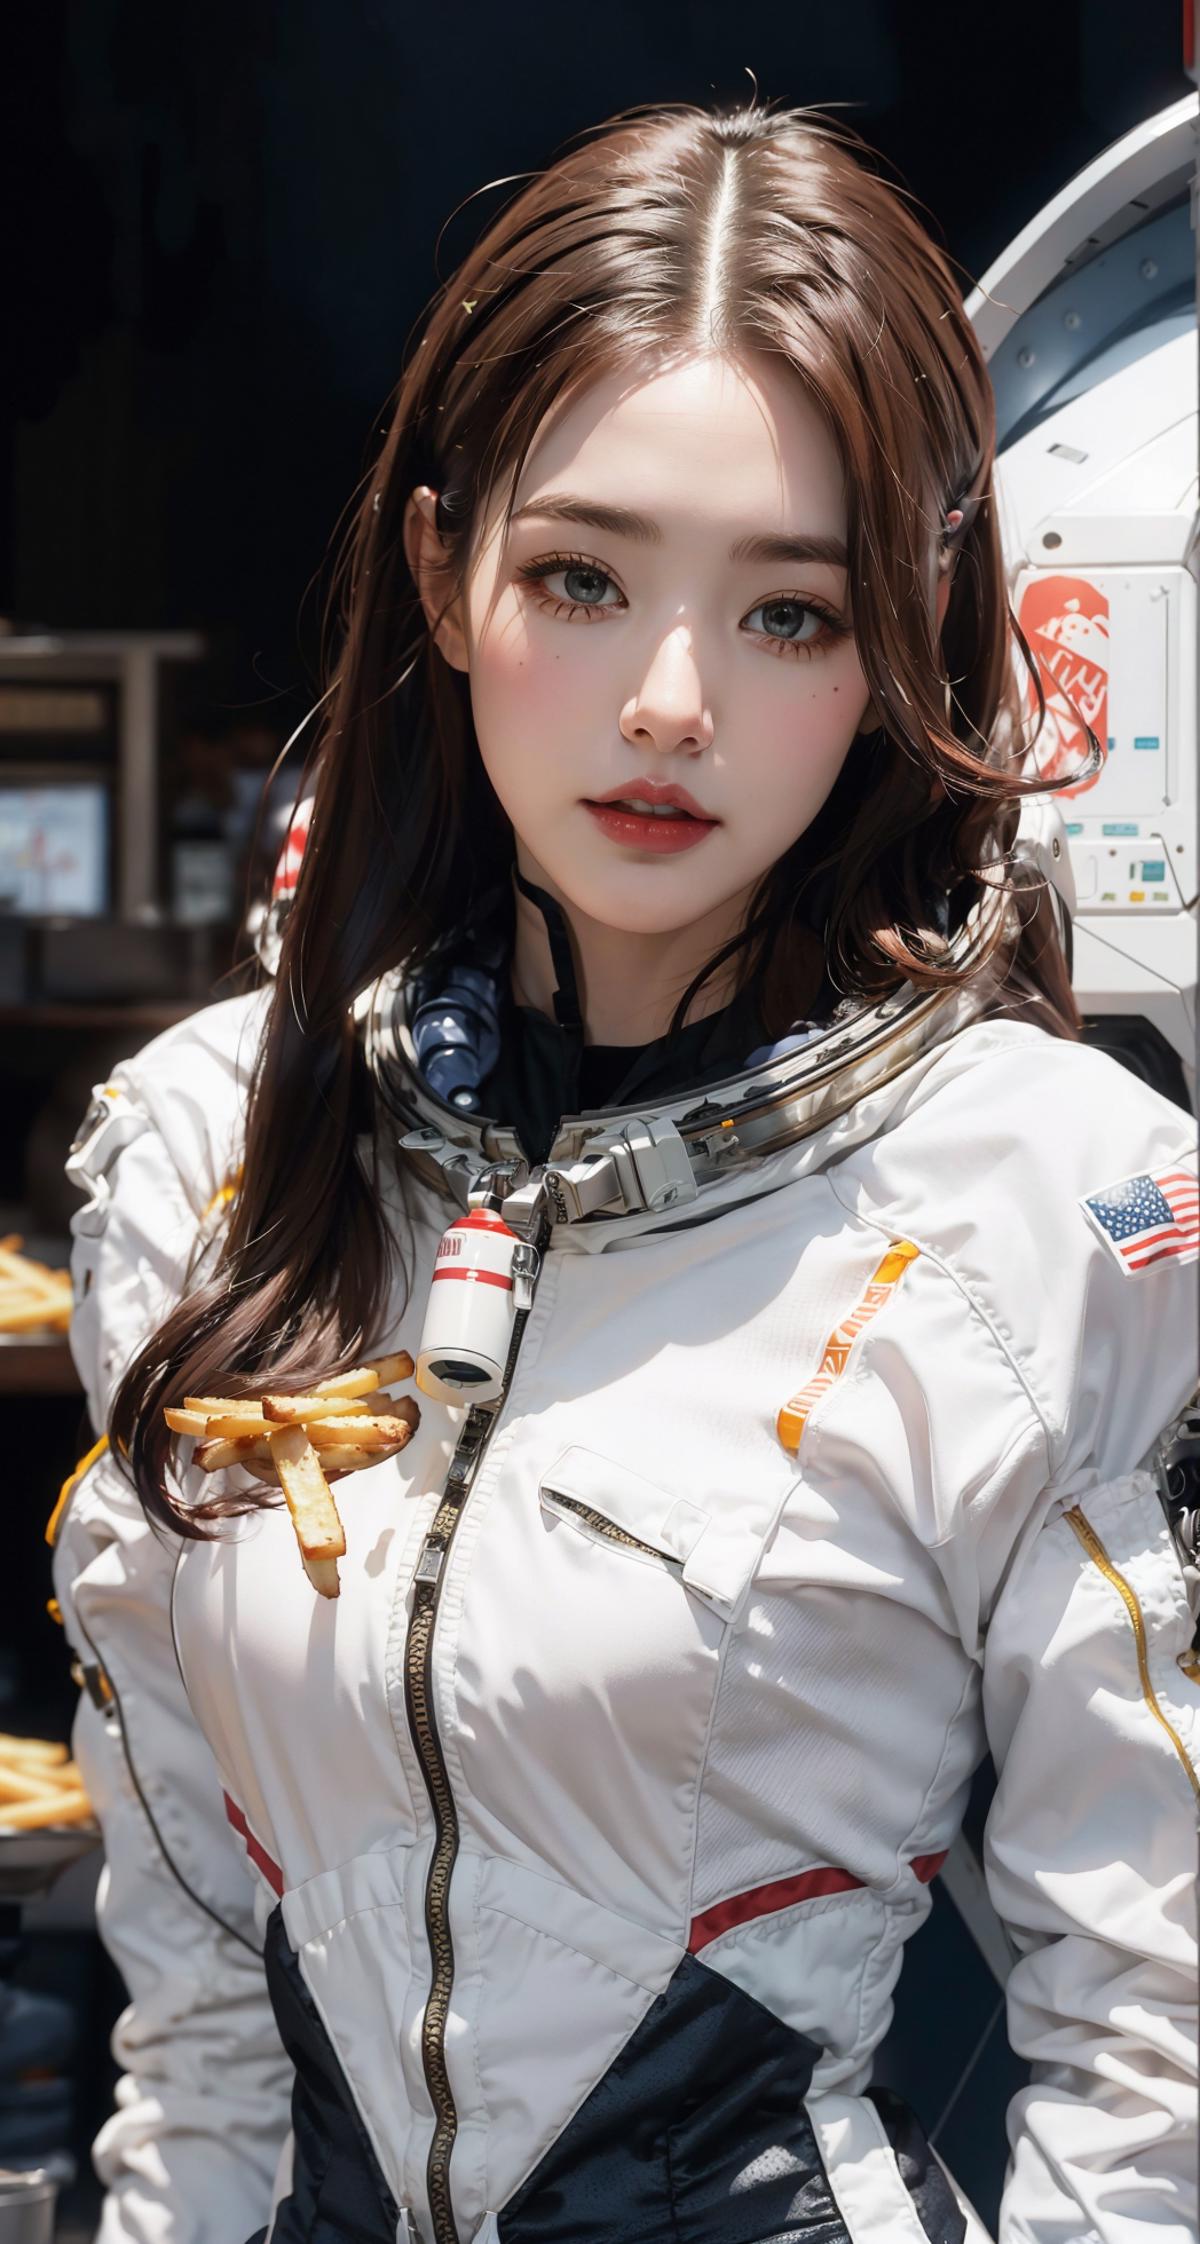 AI model image by 317997573